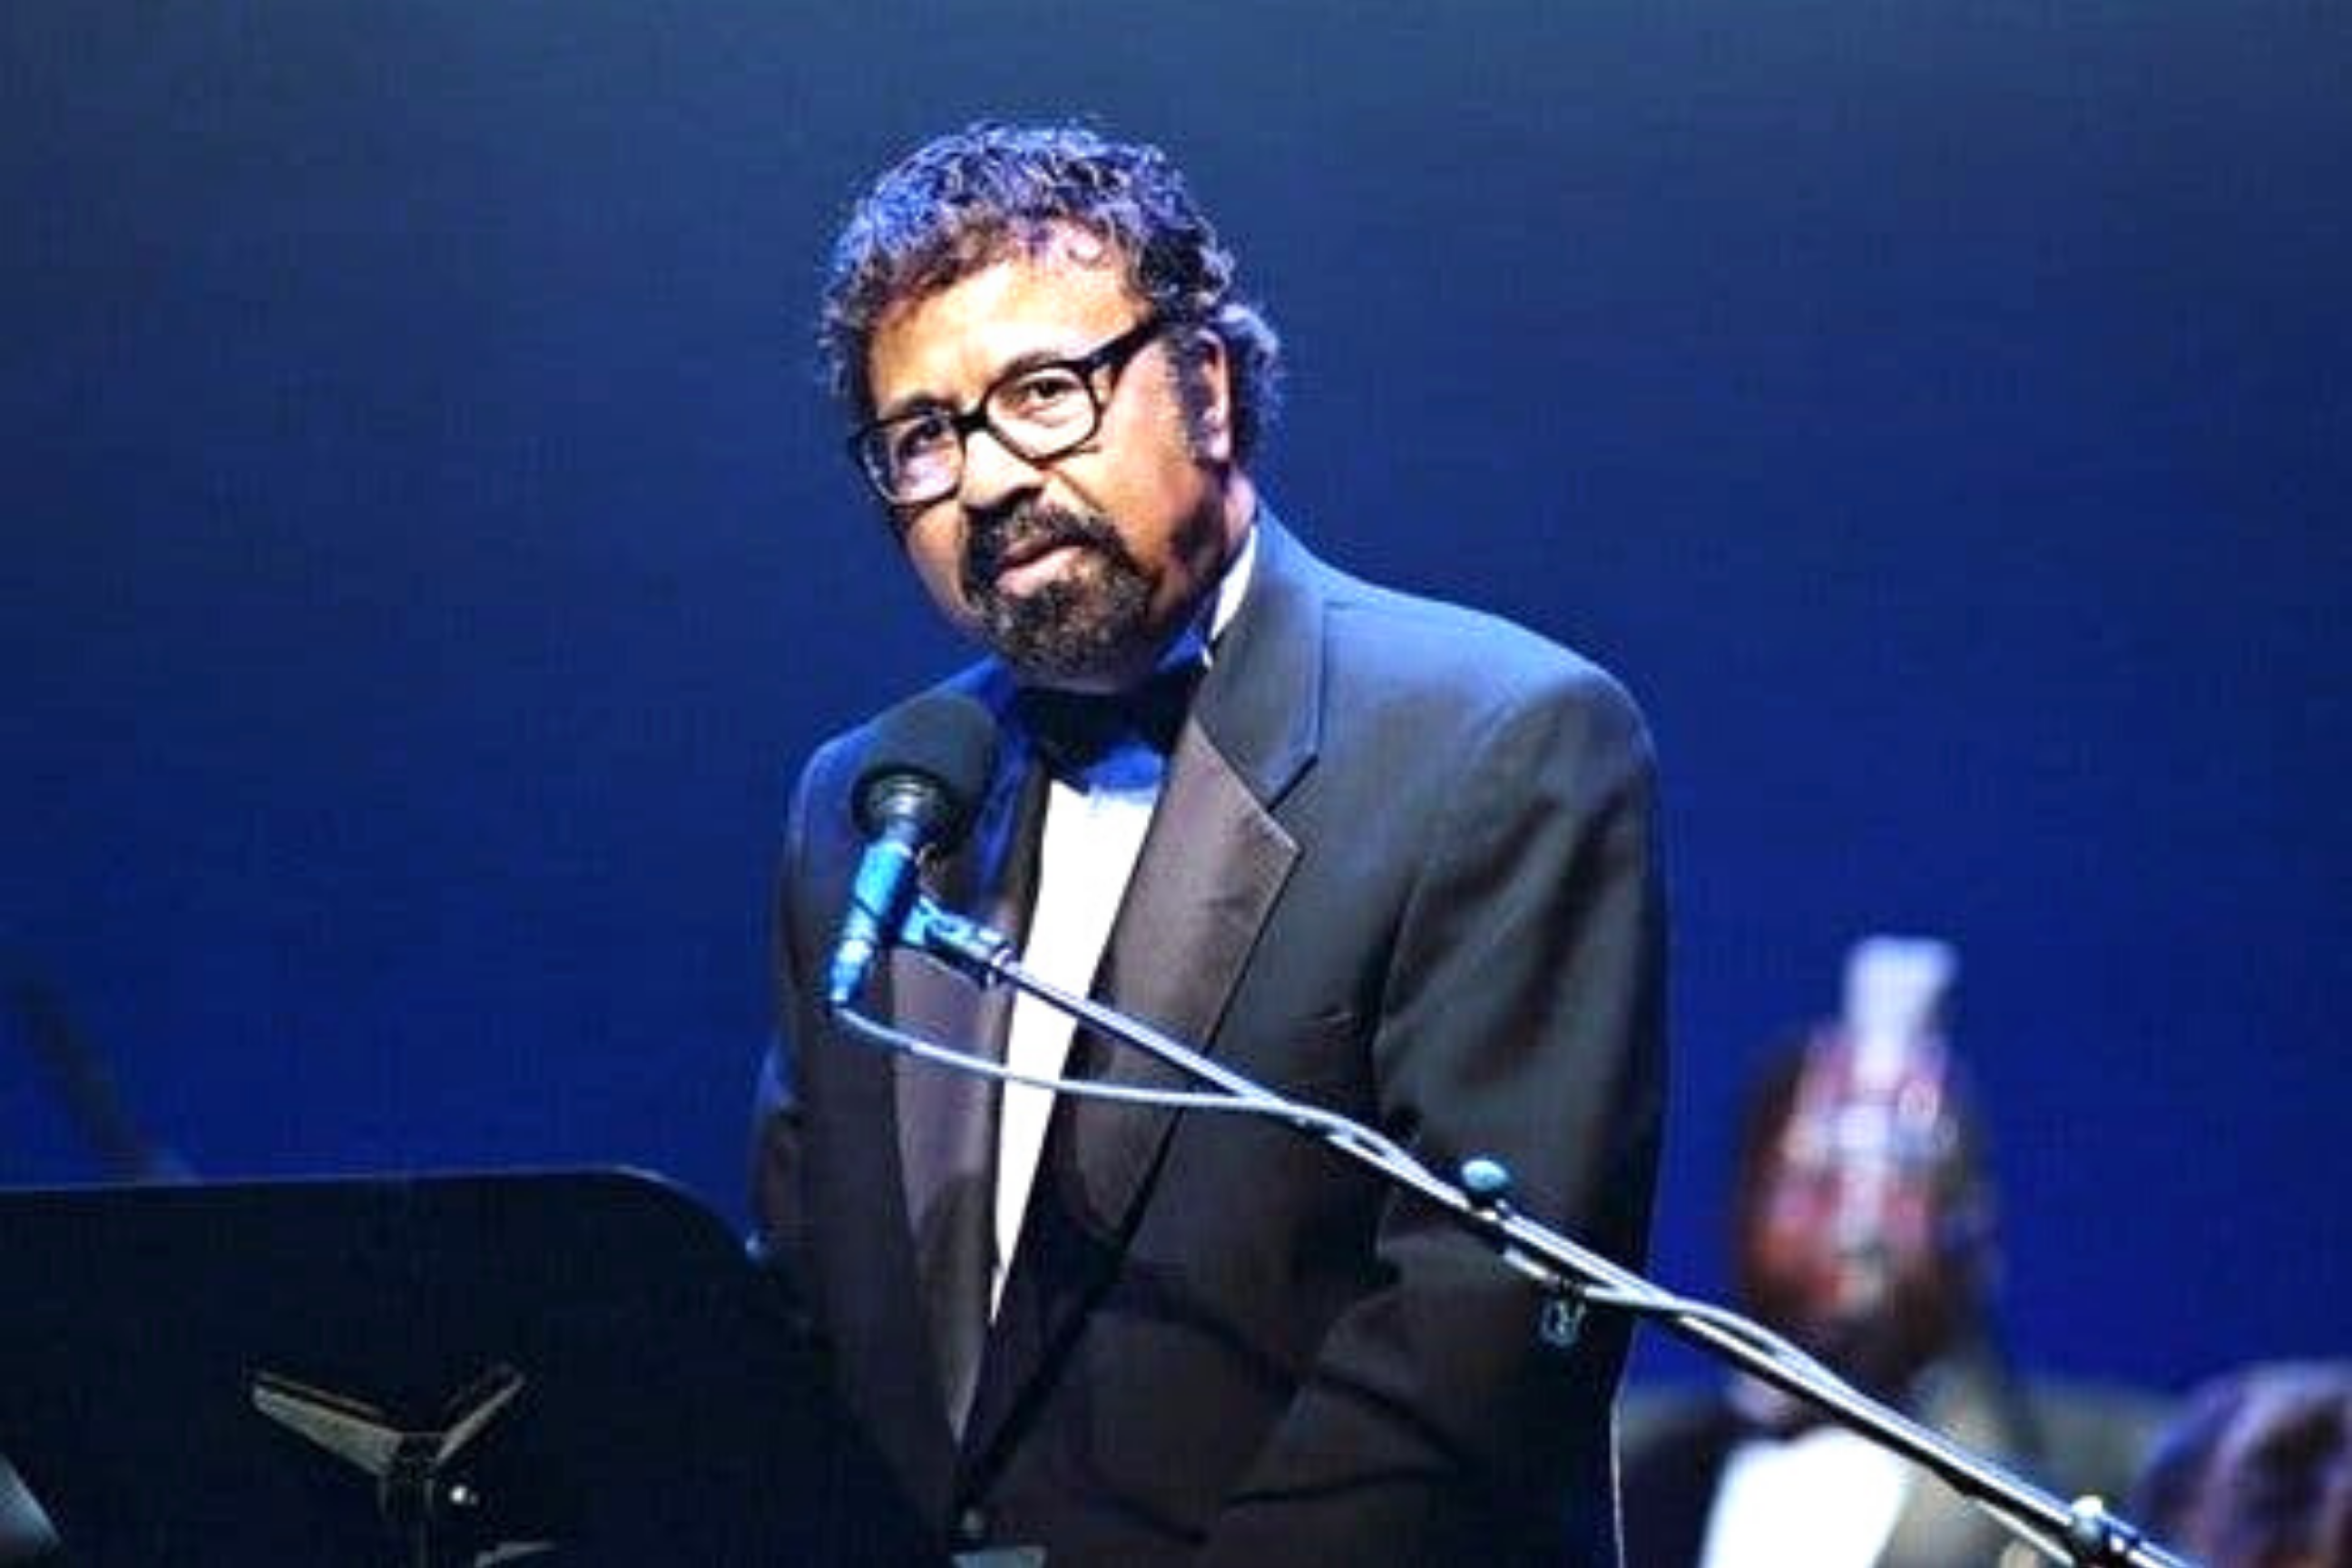 David Baker performs for an audience and stares into the crowd.